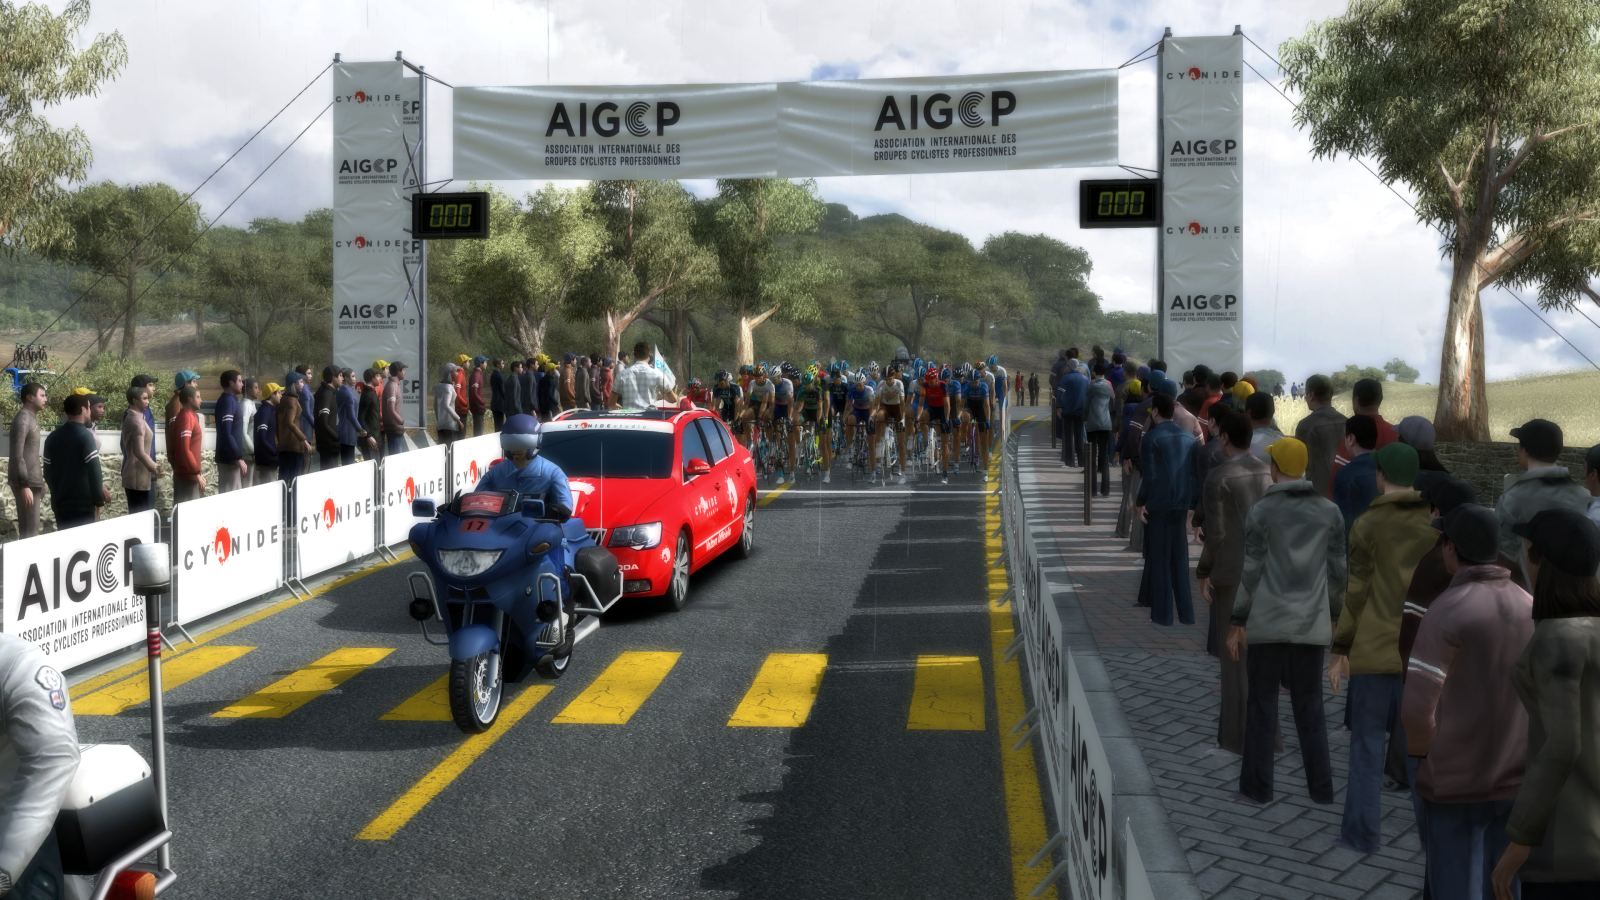 Pro Cycling Manager 2023 review - handling the race with Swiss